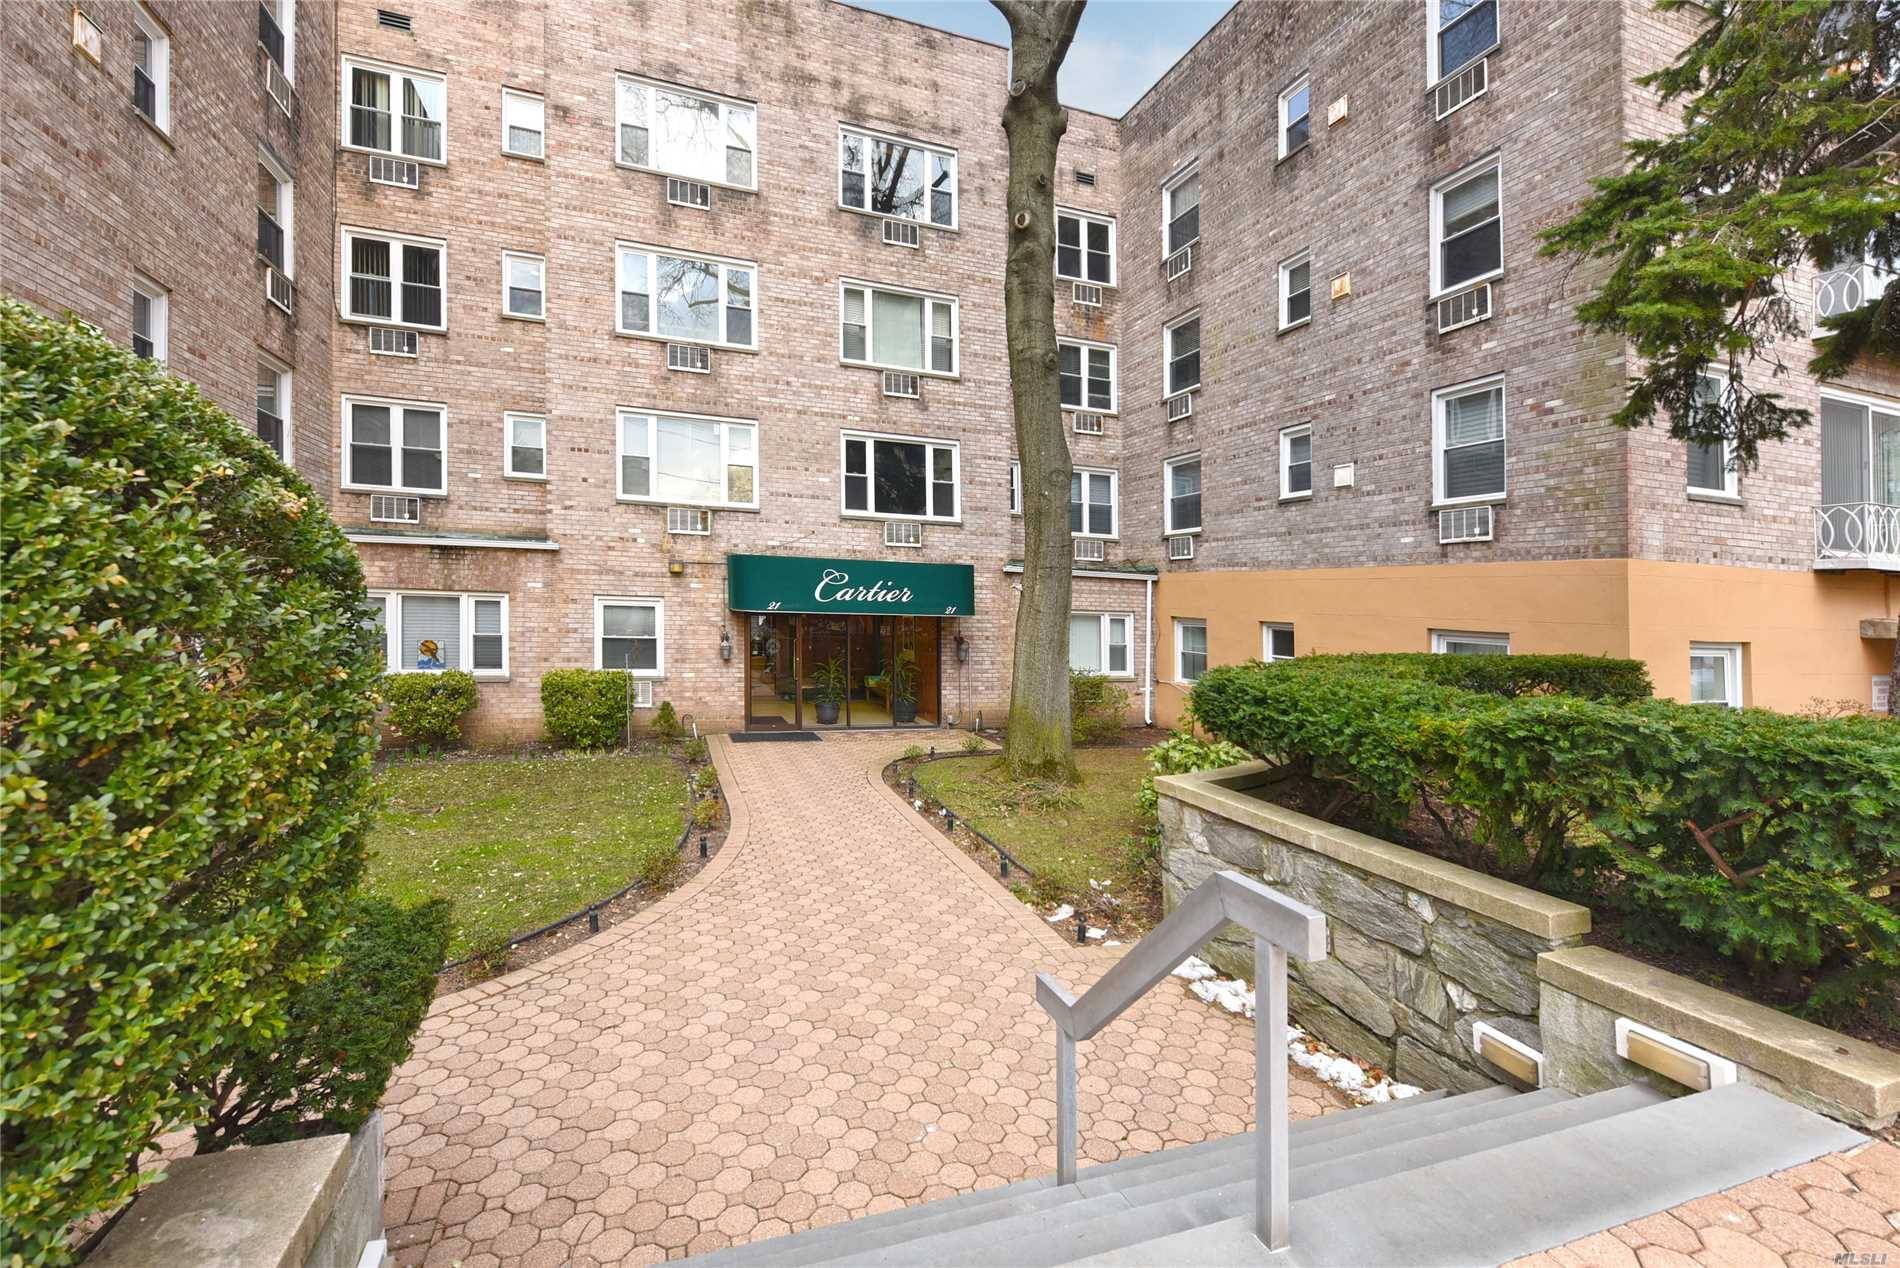 Completely Renovated, Open Concept 2 Bedroom/2 Full Bath Sponsor Apartment In Elevator Building Located Close To All In Great Neck.